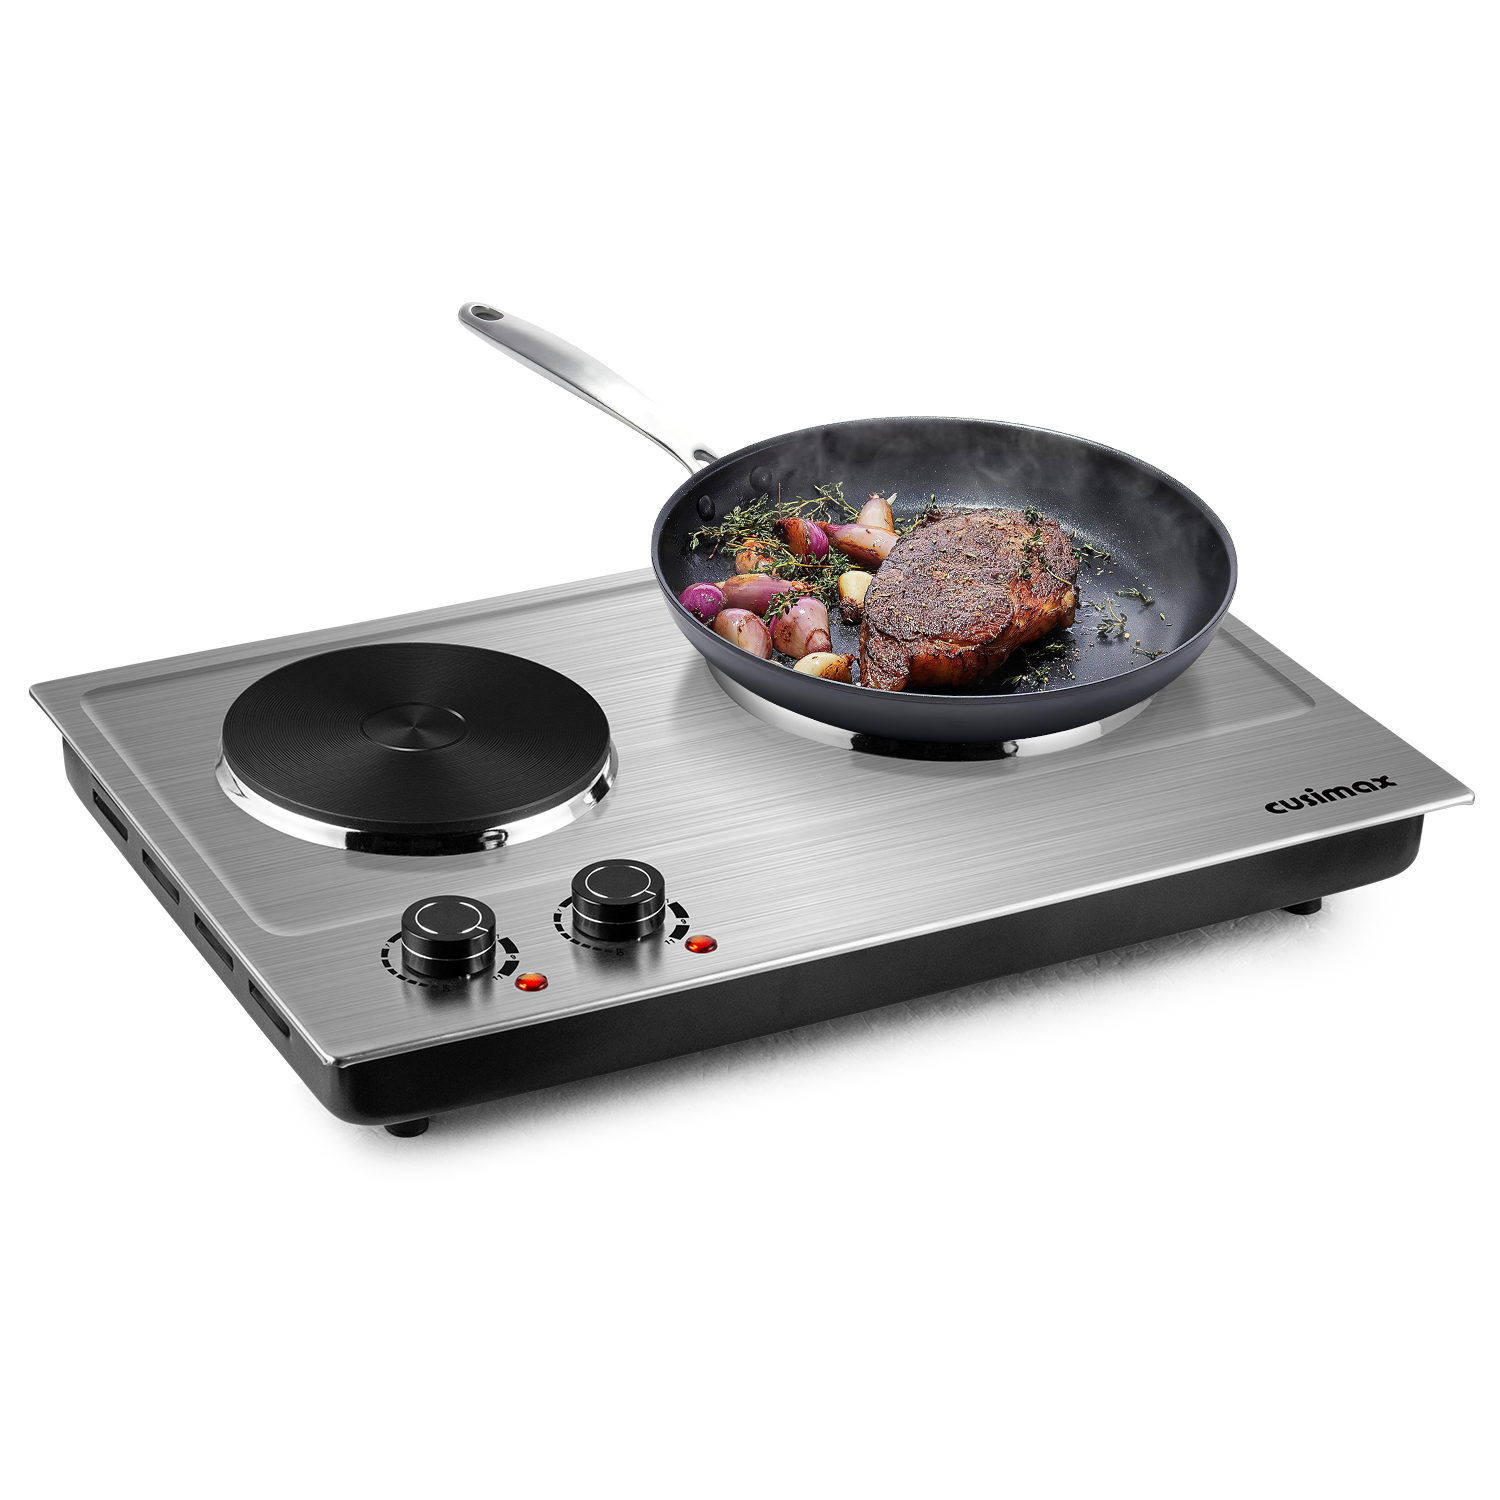 Cusimax 1800W Portable Double Hot Plate,Stainless Steel Countertop Cooktop,Cast Iron Electric Double Burner,Easy To Clean